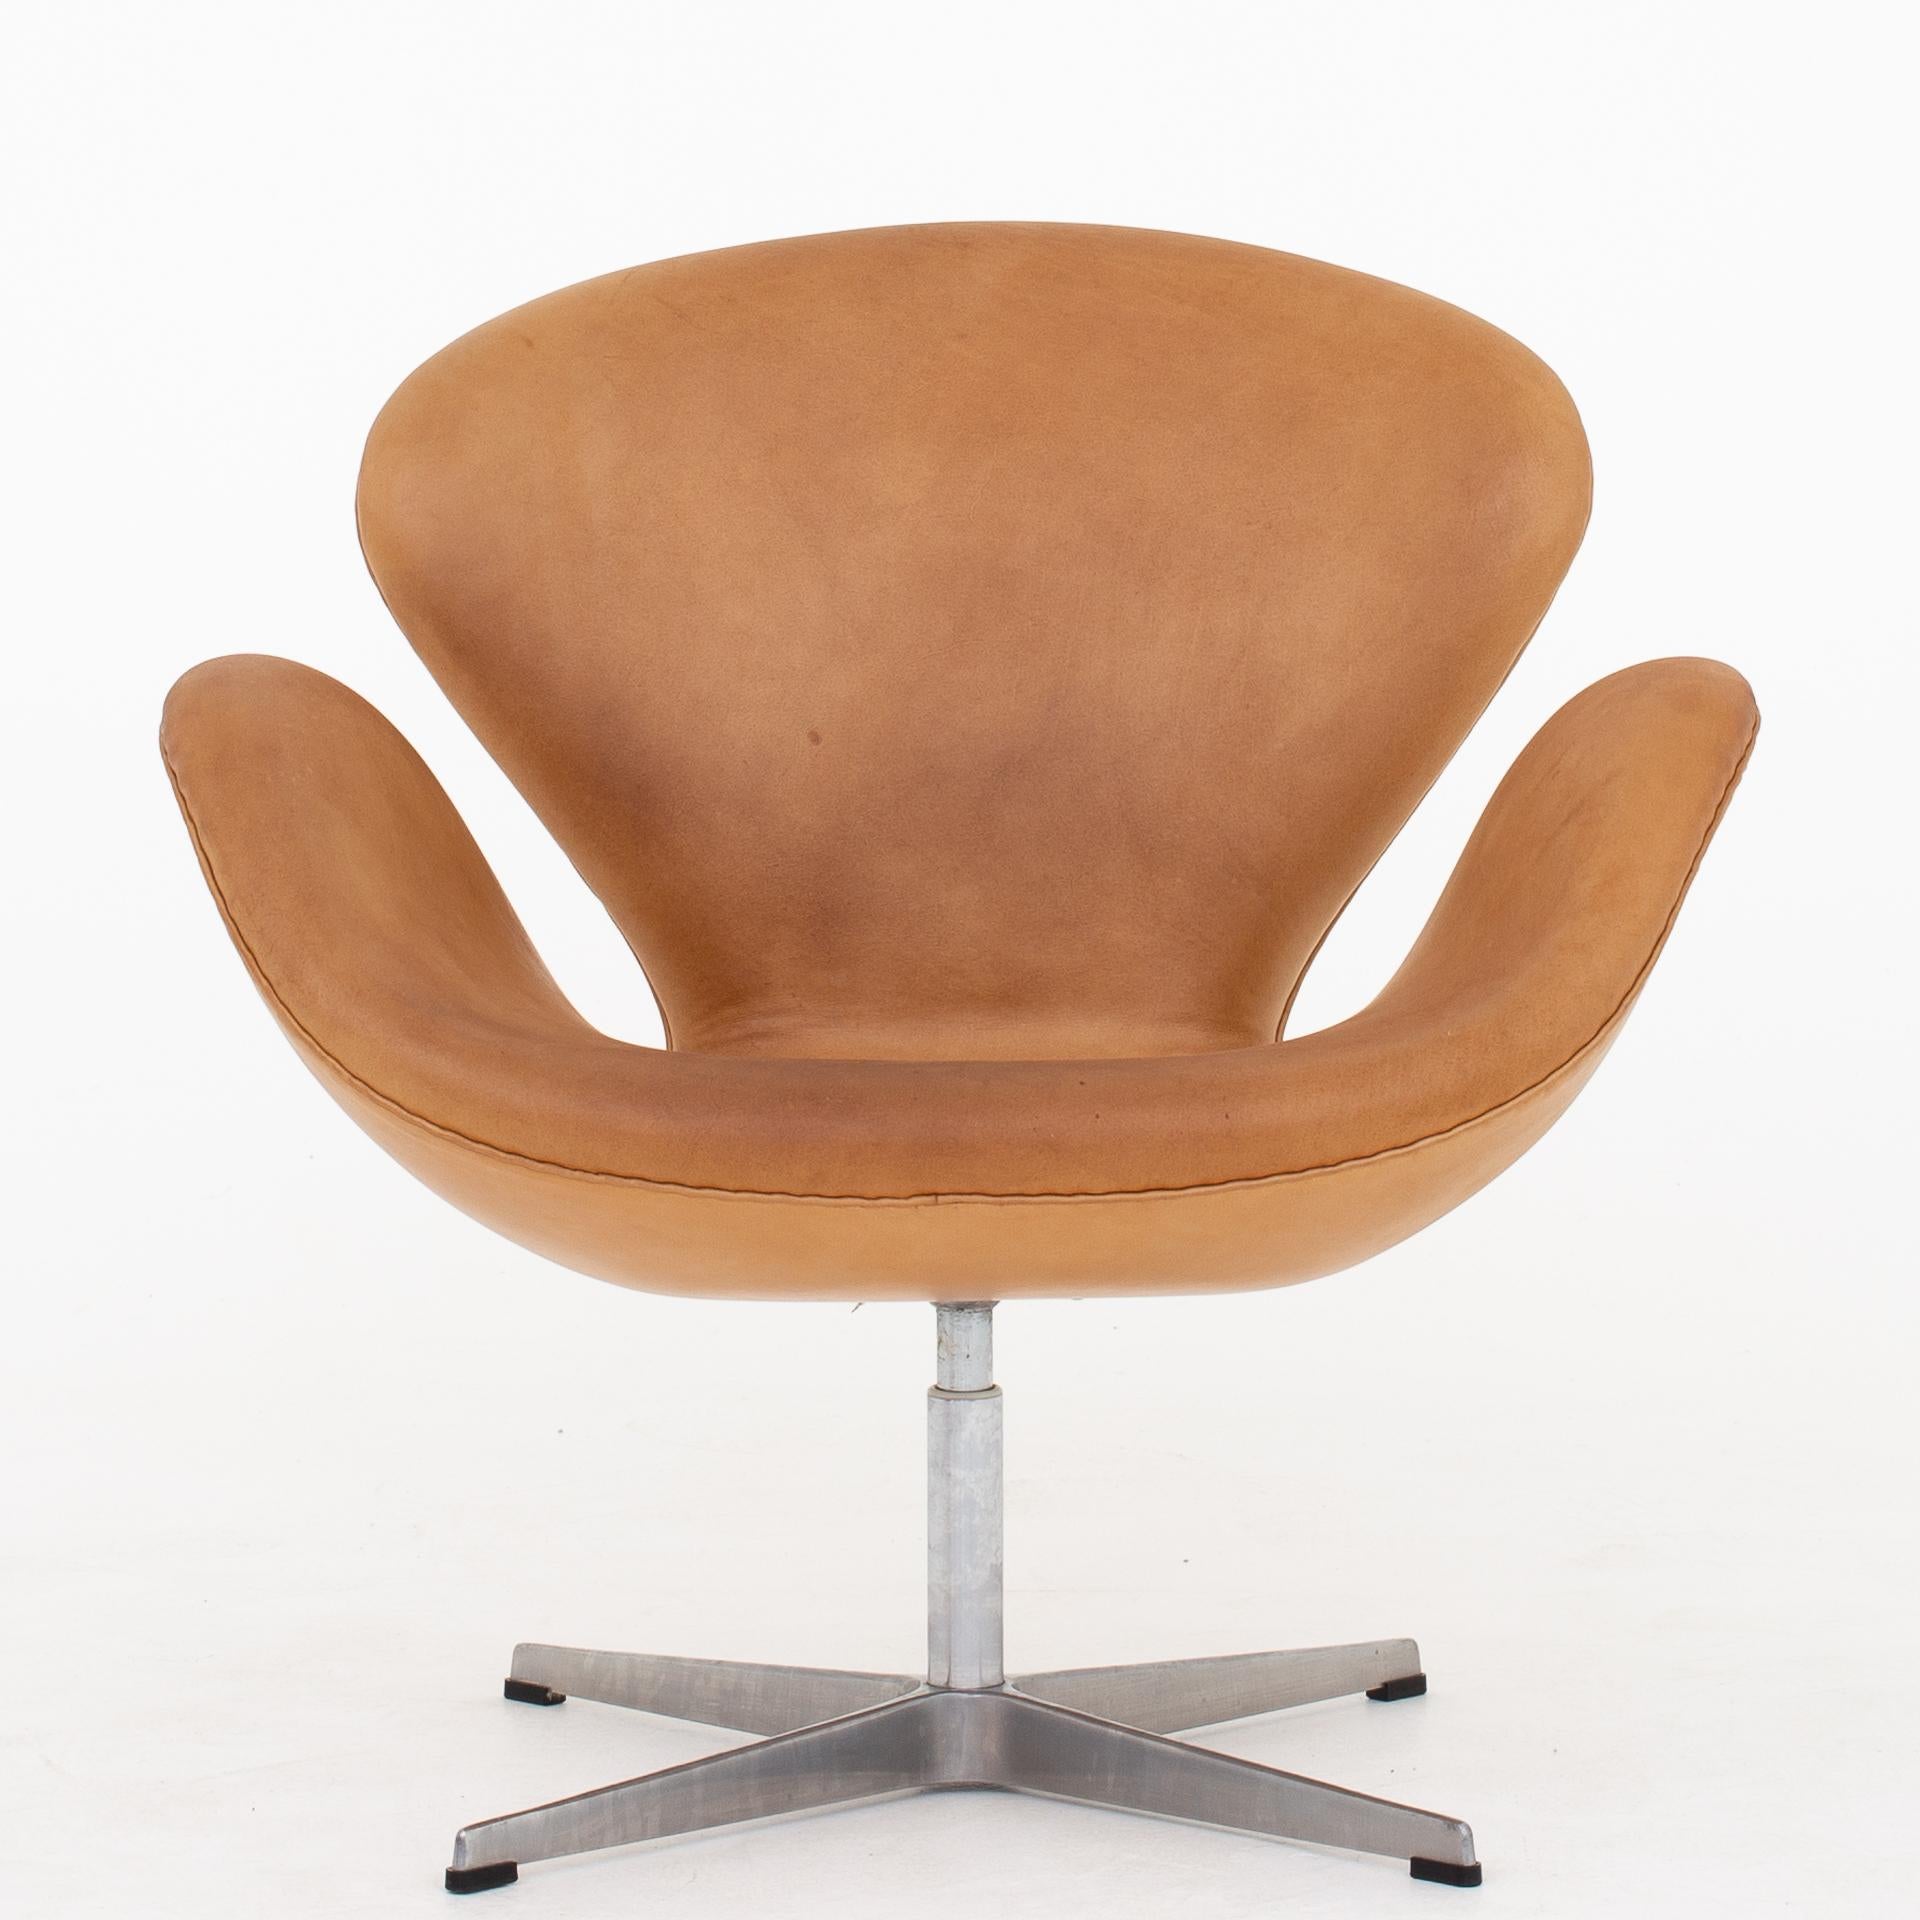 20th Century The Swan Chair by Arne Jacobsen